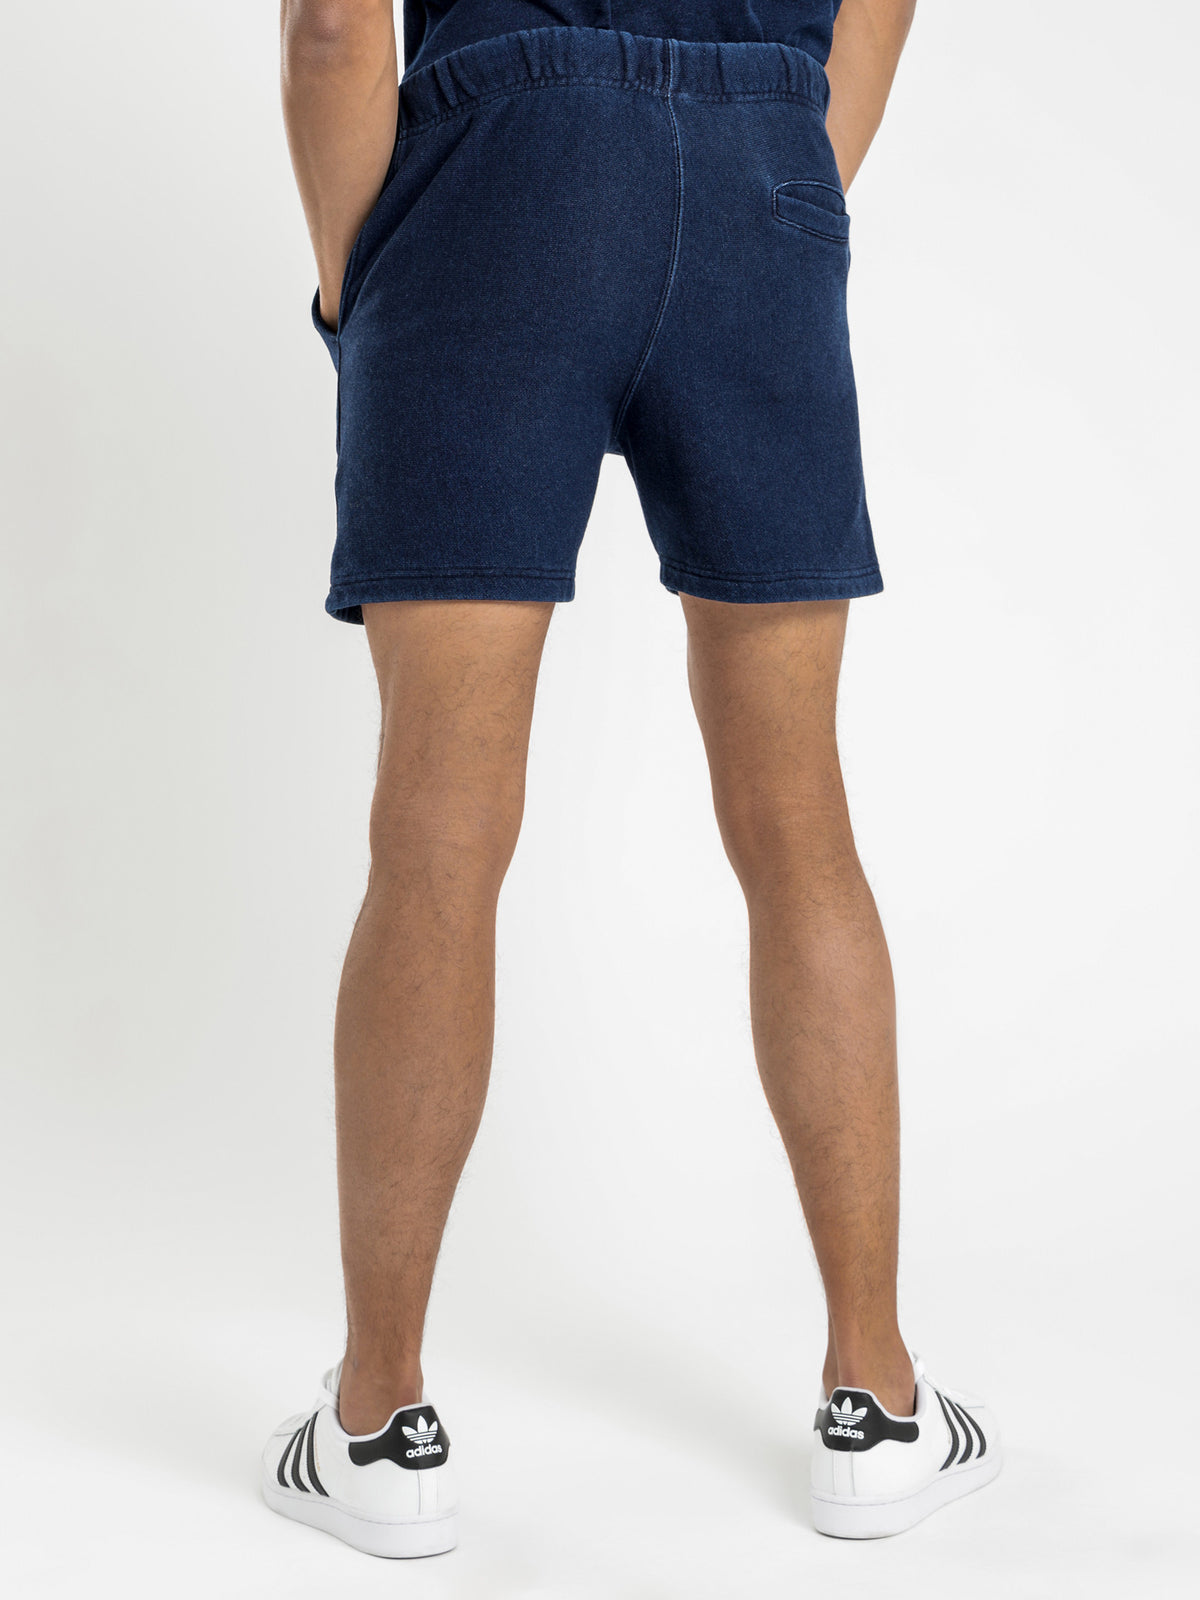 Heritage Re:Bound Shorts in Blue